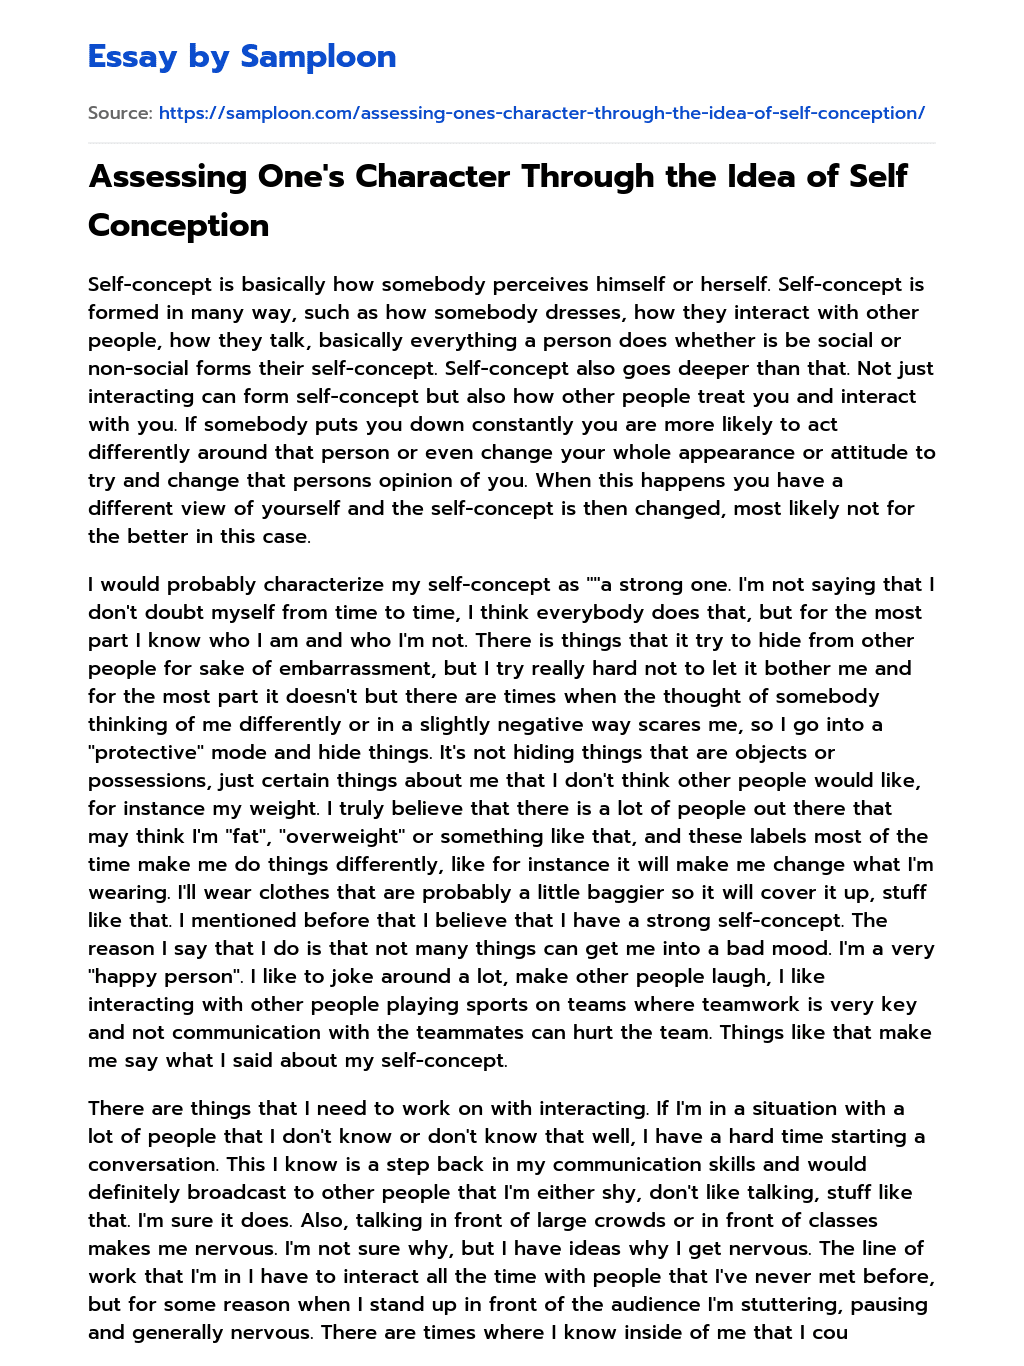 Assessing One’s Character Through the Idea of Self Conception essay